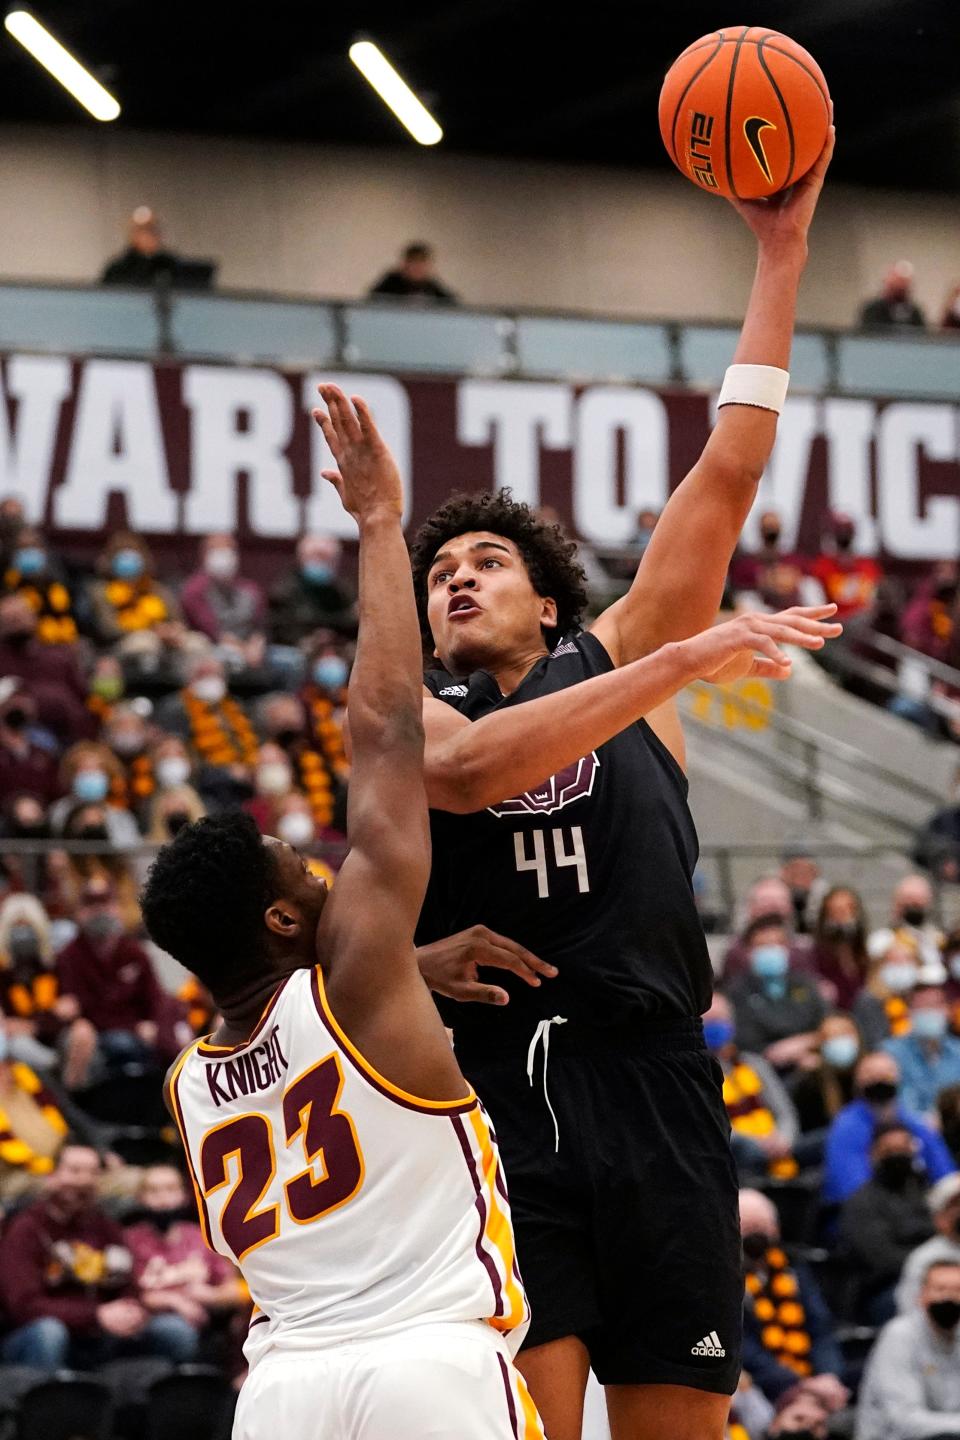 Missouri State forward Gaige Prim, right, shoots over Loyola Chicago forward Chris Knight during the first half of an NCAA college basketball game in Chicago, Saturday, Jan. 22, 2022. (AP Photo/Nam Y. Huh)